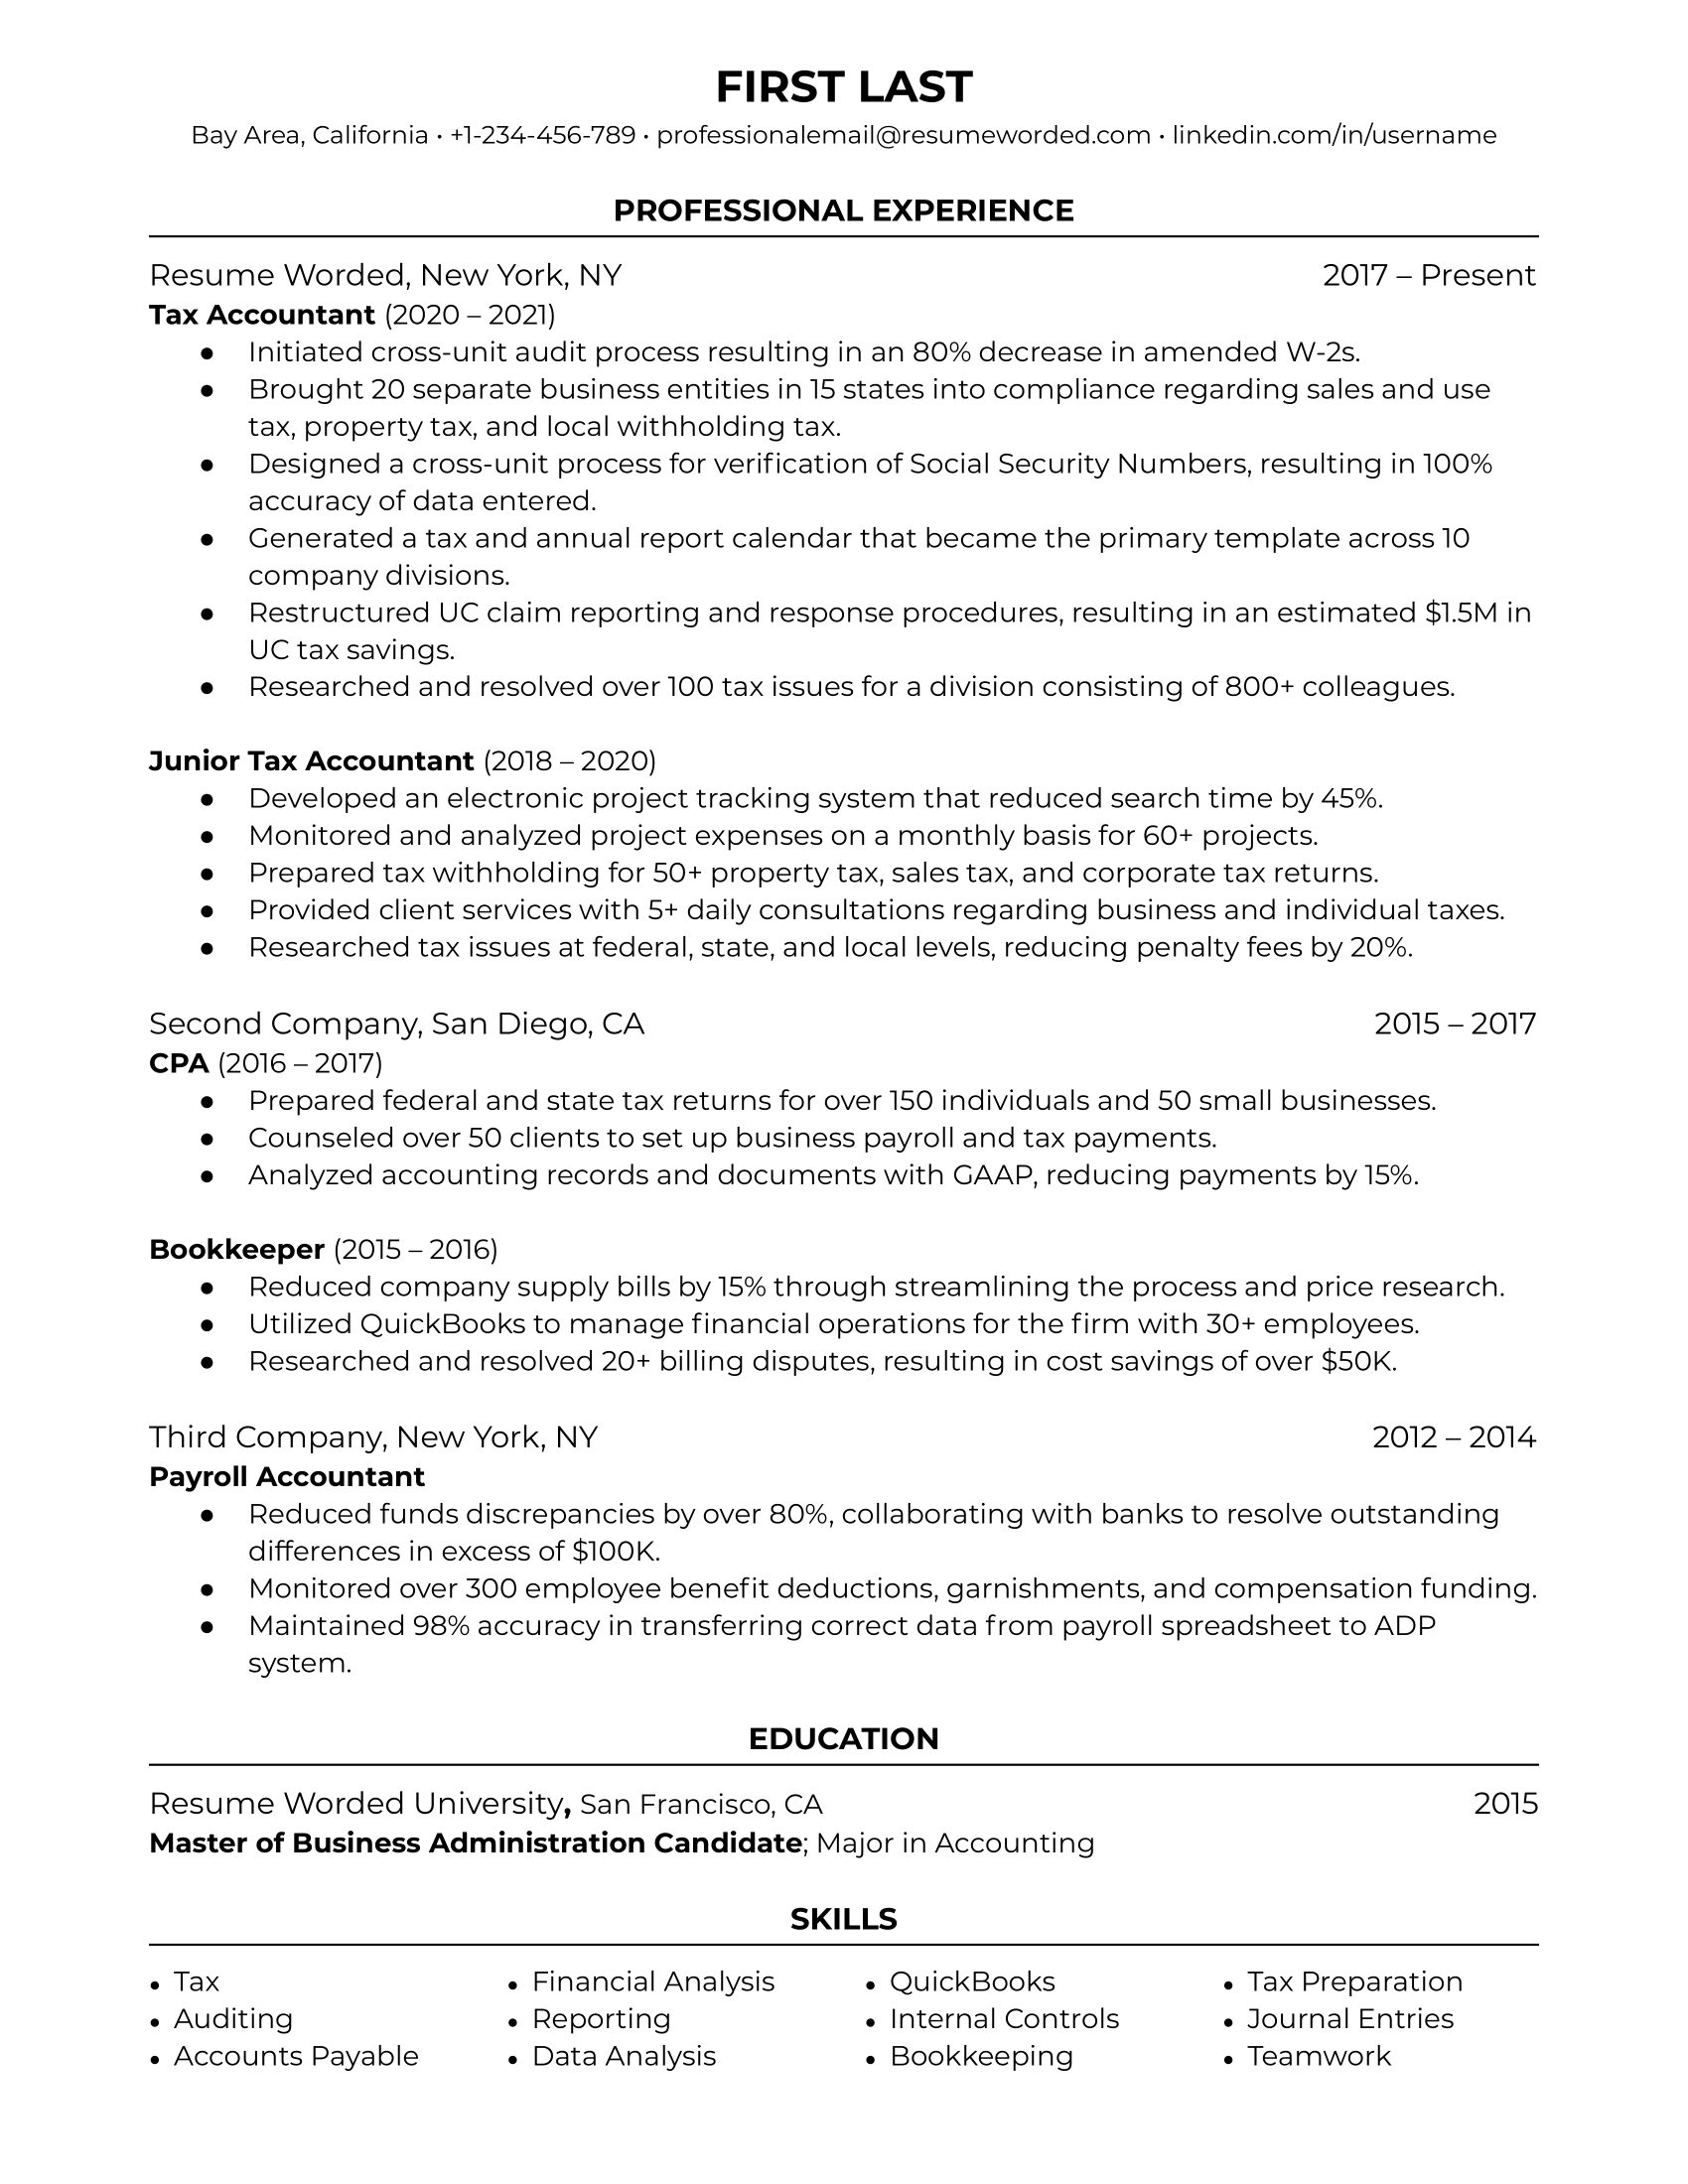 A Tax Accountant's resume showing key skills, certifications, and problem-solving experiences.